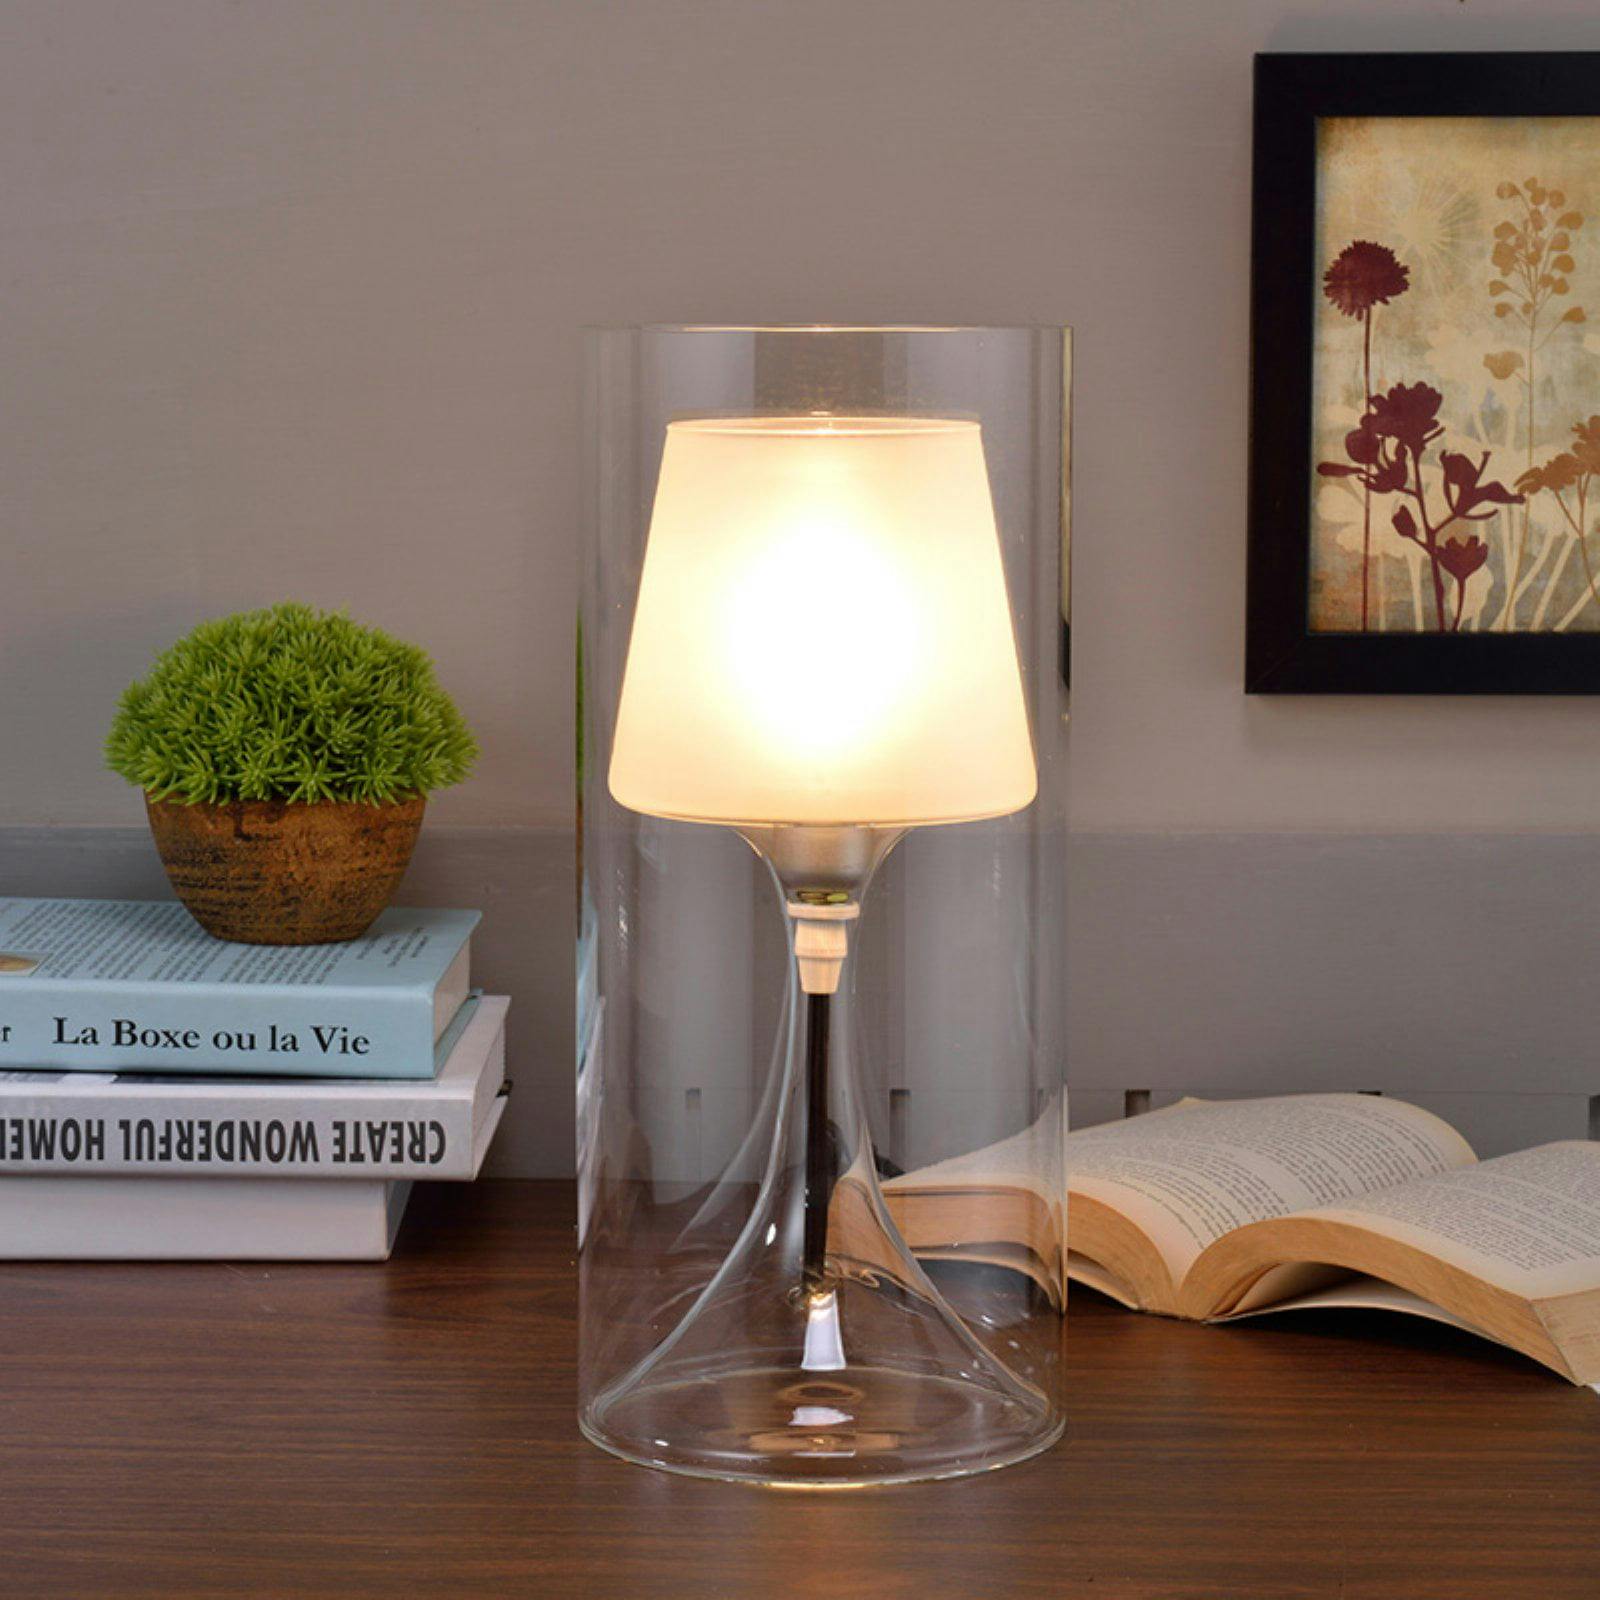 16" Industrial Hurricane Glass Accent Table Lamp with Frosted Shade - White